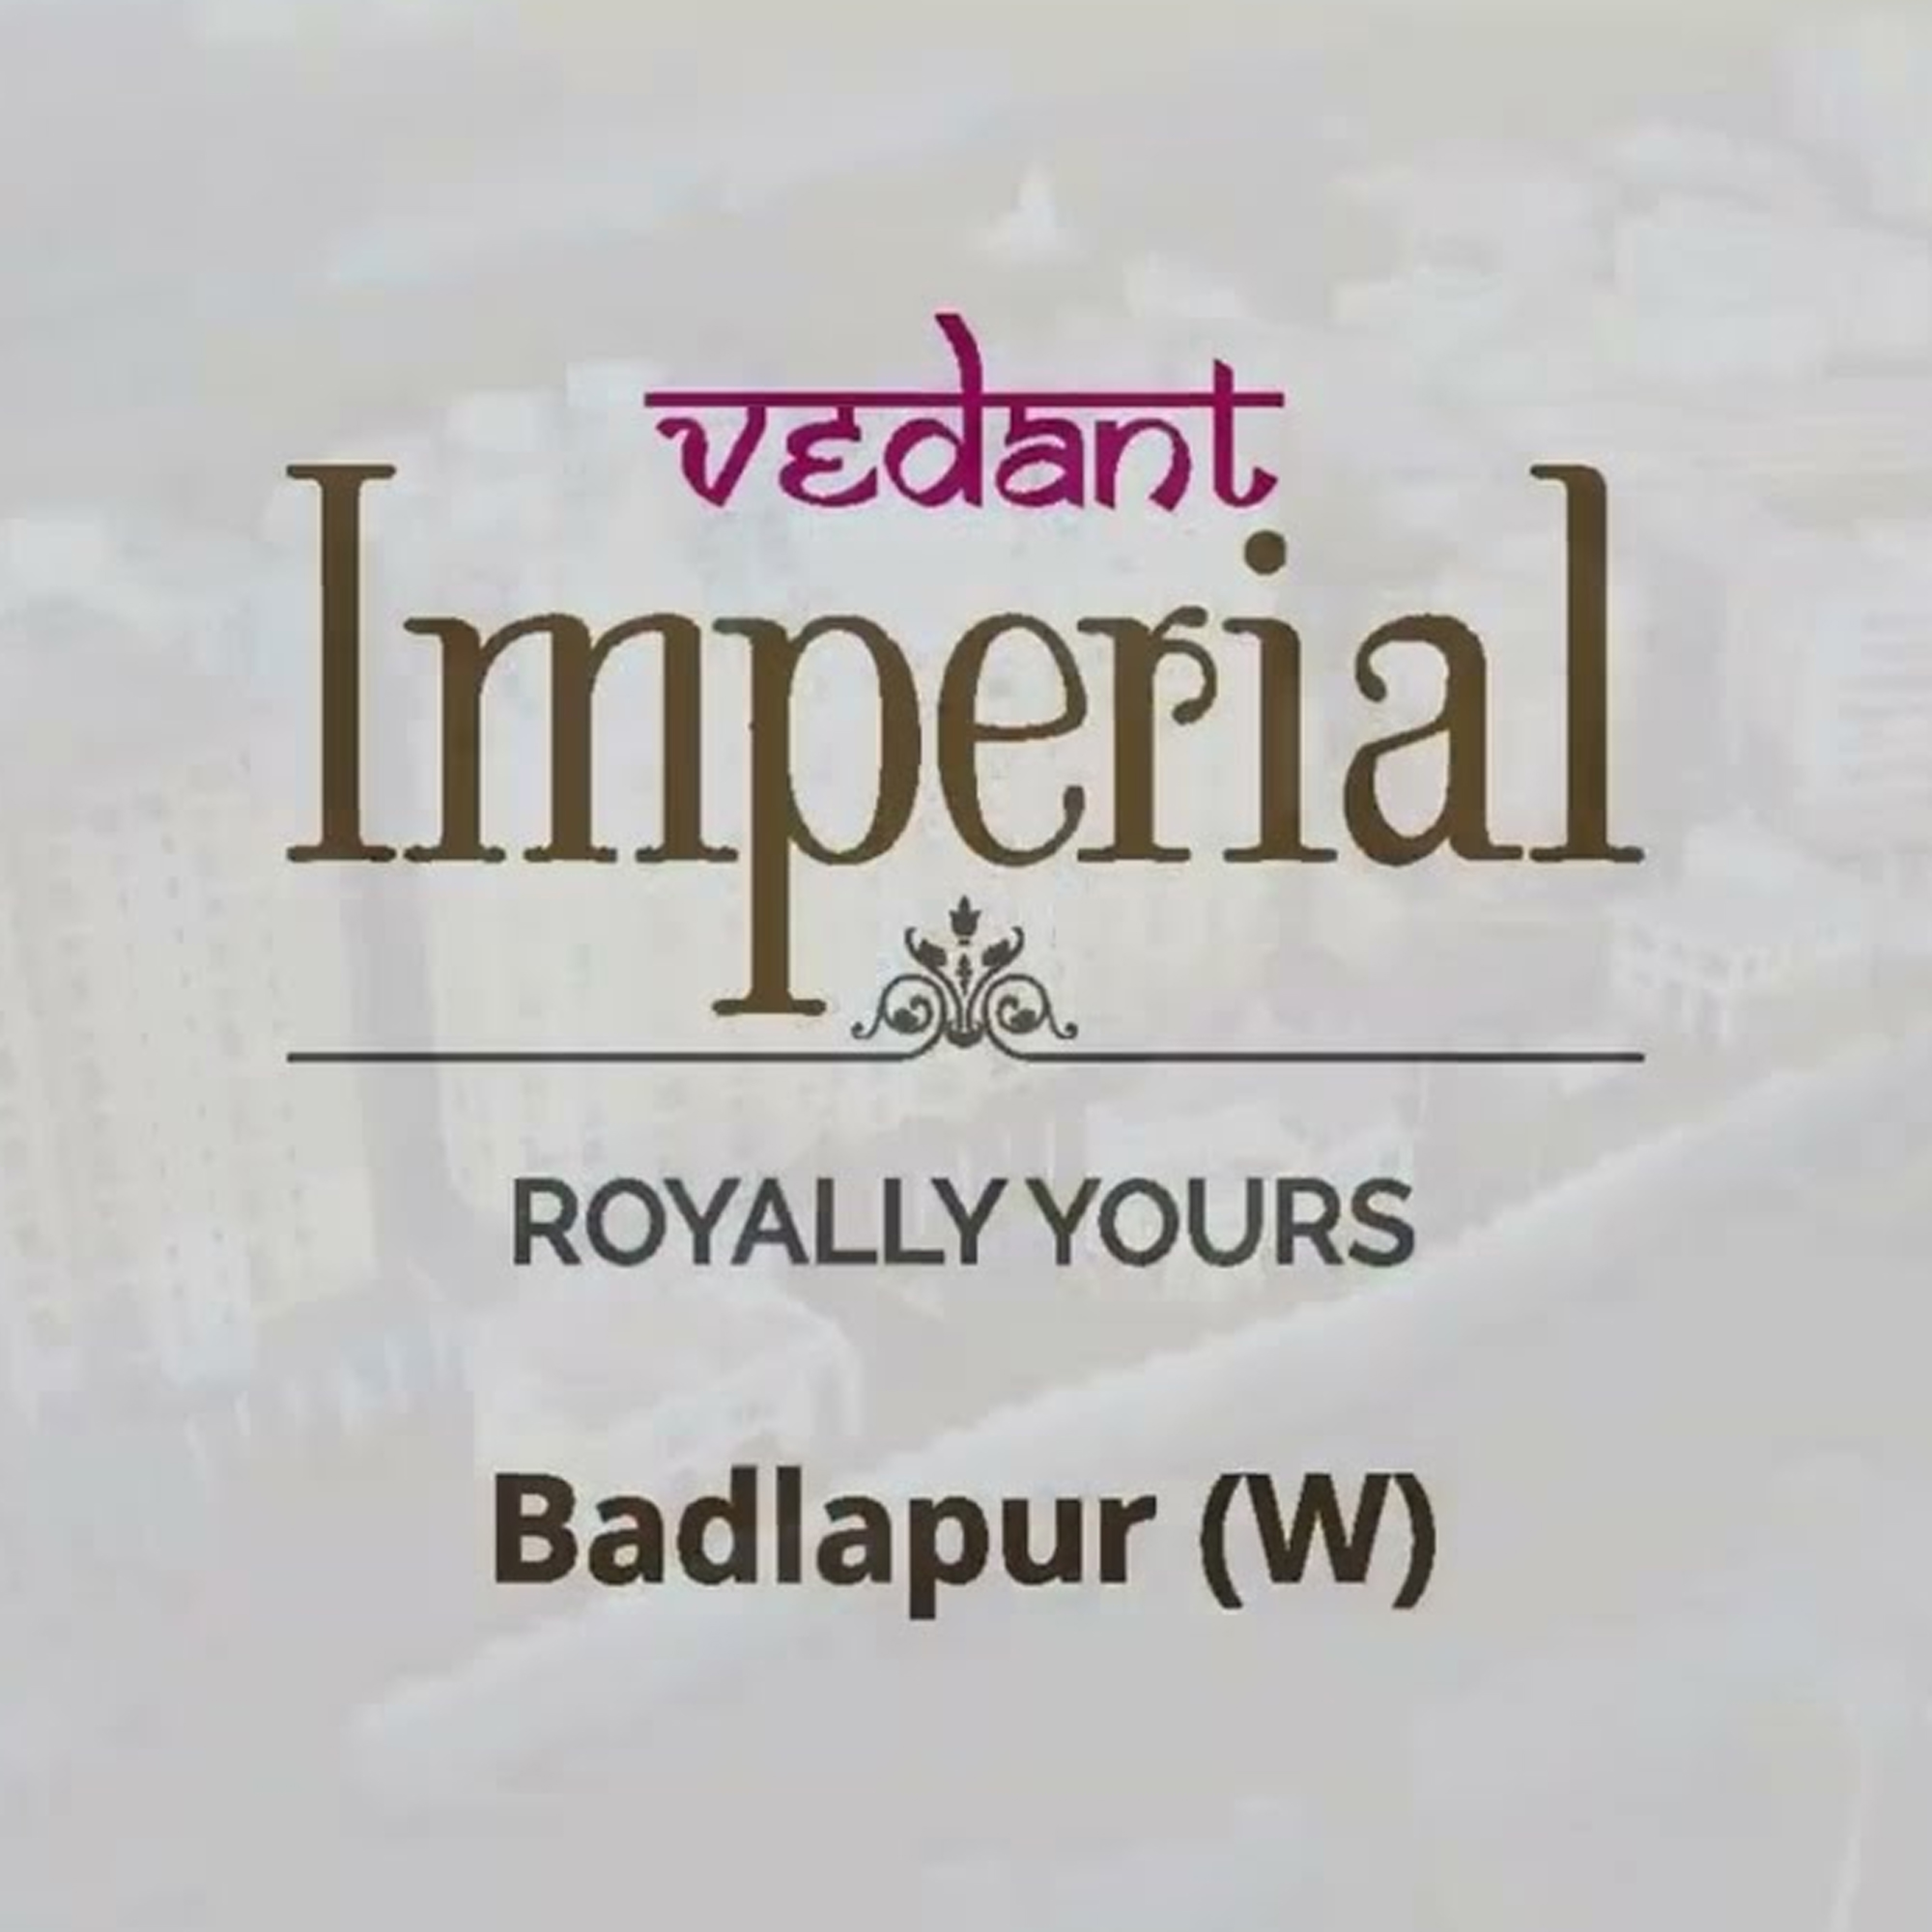 Welcome to Royal Living at Vedant Imperial, A project by Tharwani Infrastructures